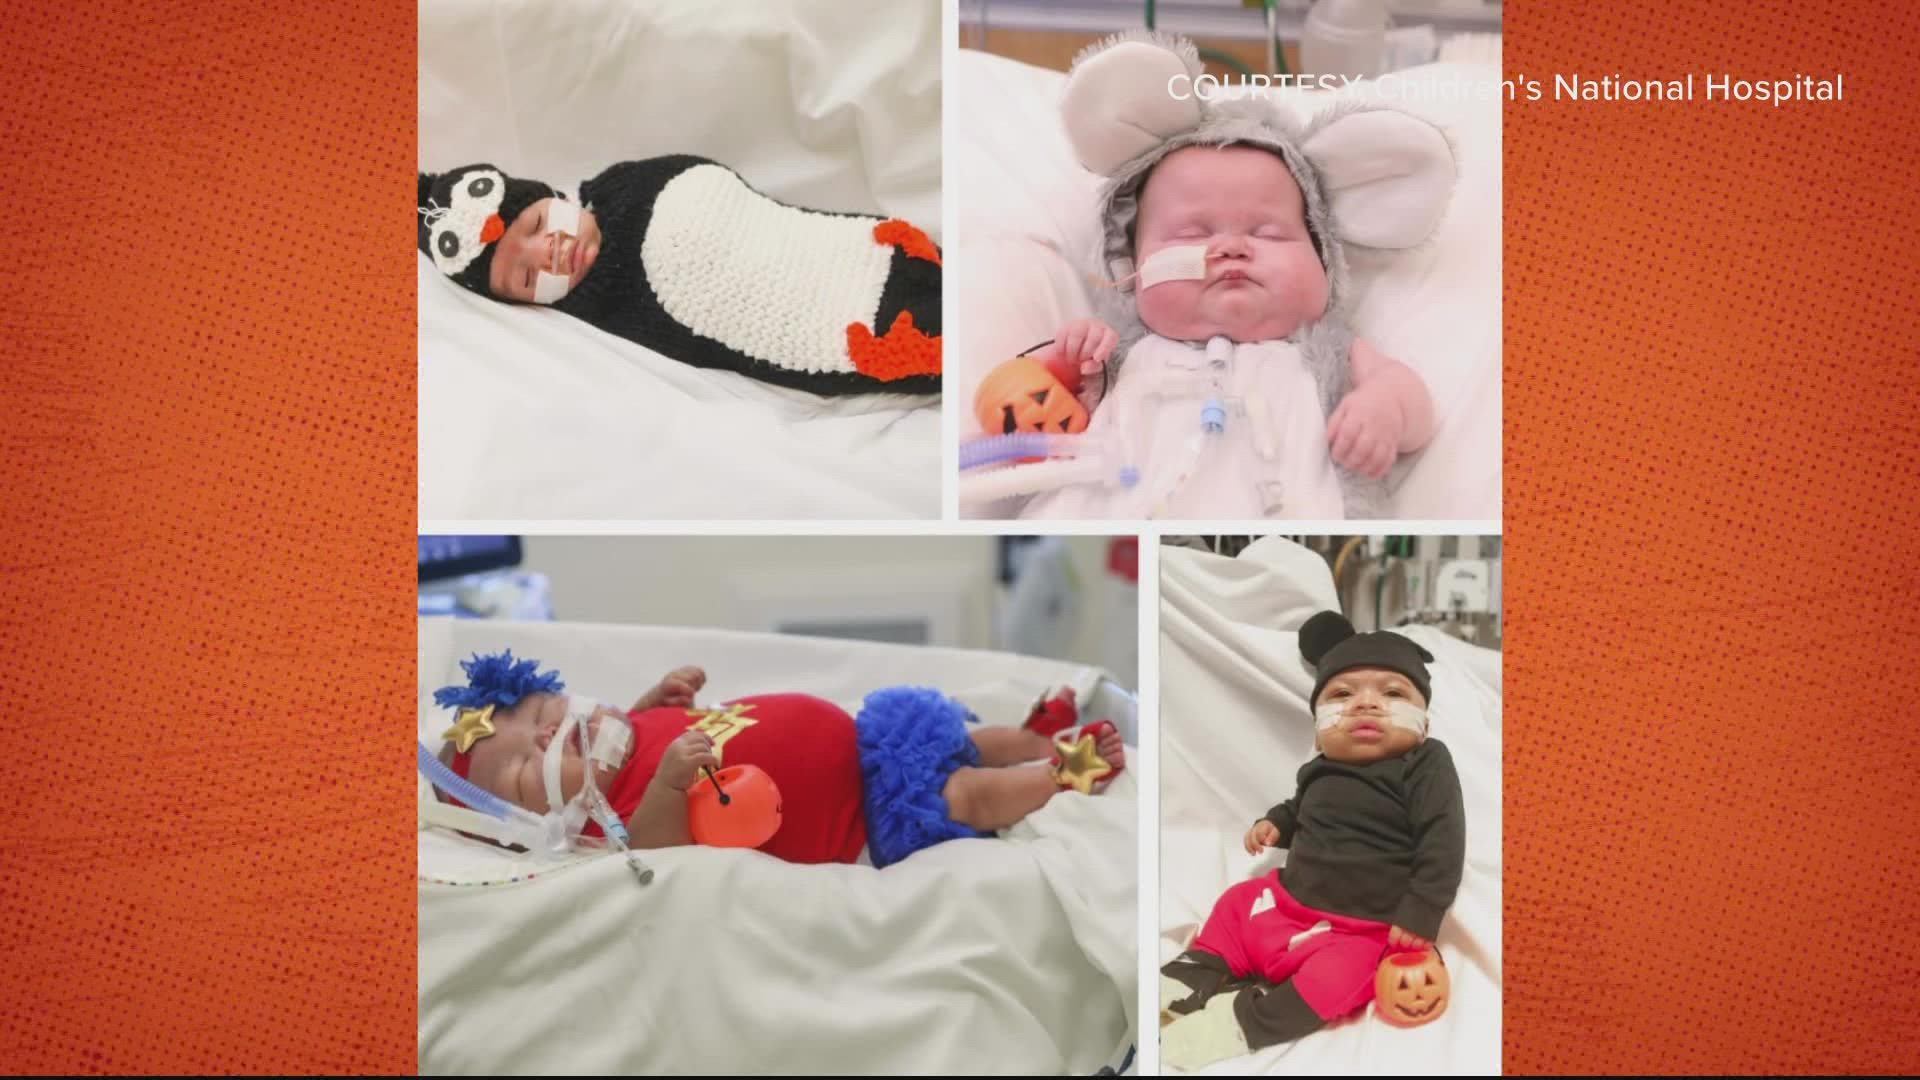 A scare is born tonight! Children's National Hospital dressed up its littlest patients for their very first Halloween in the Neonatal Intensive Care Unit.